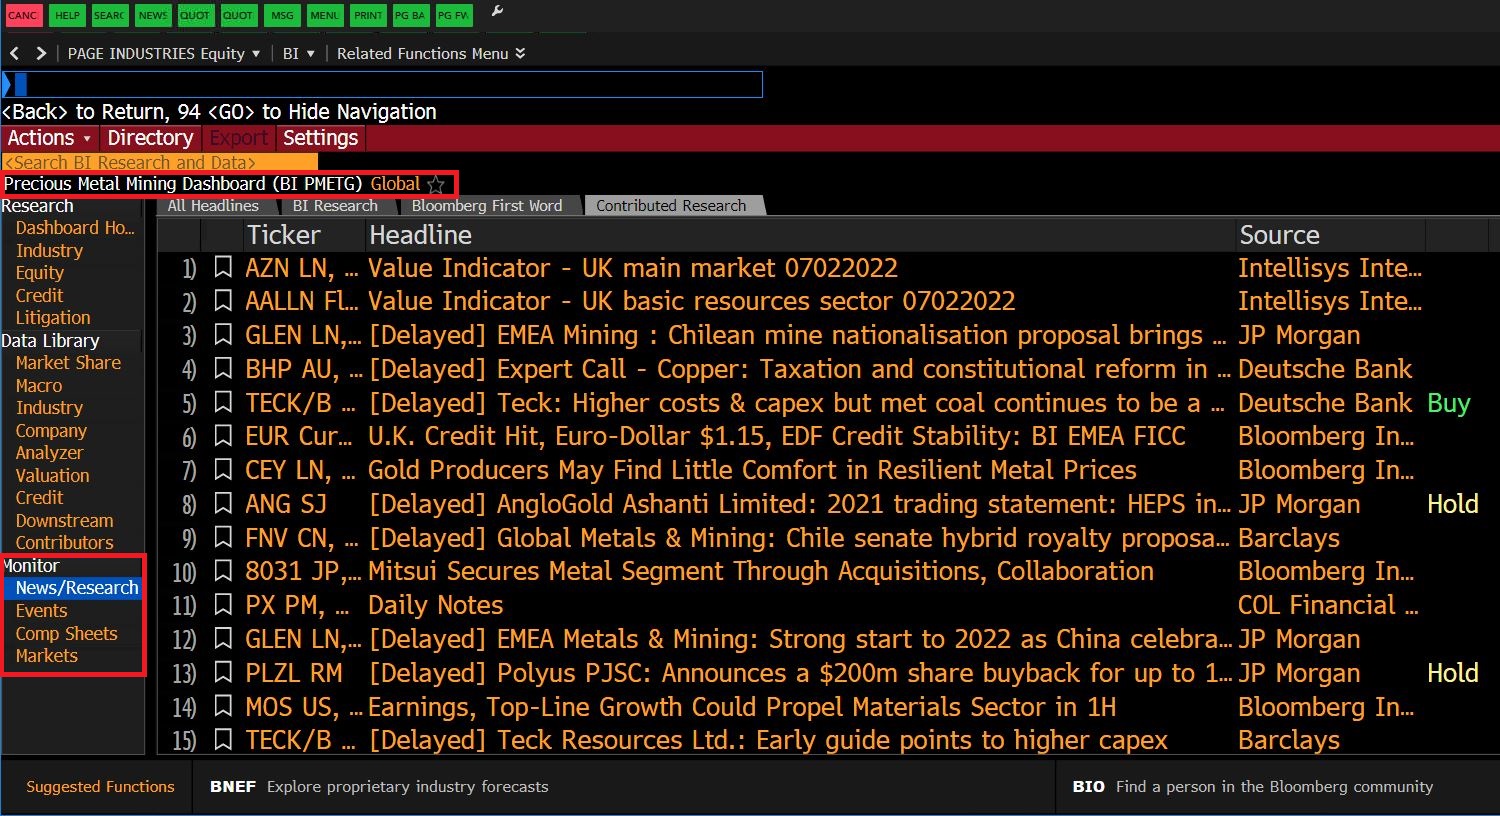 Login to Bloomberg (Available in Library) then Search for BI then Click on Industrials then Select Precious Metal Mining and Click on News and Research